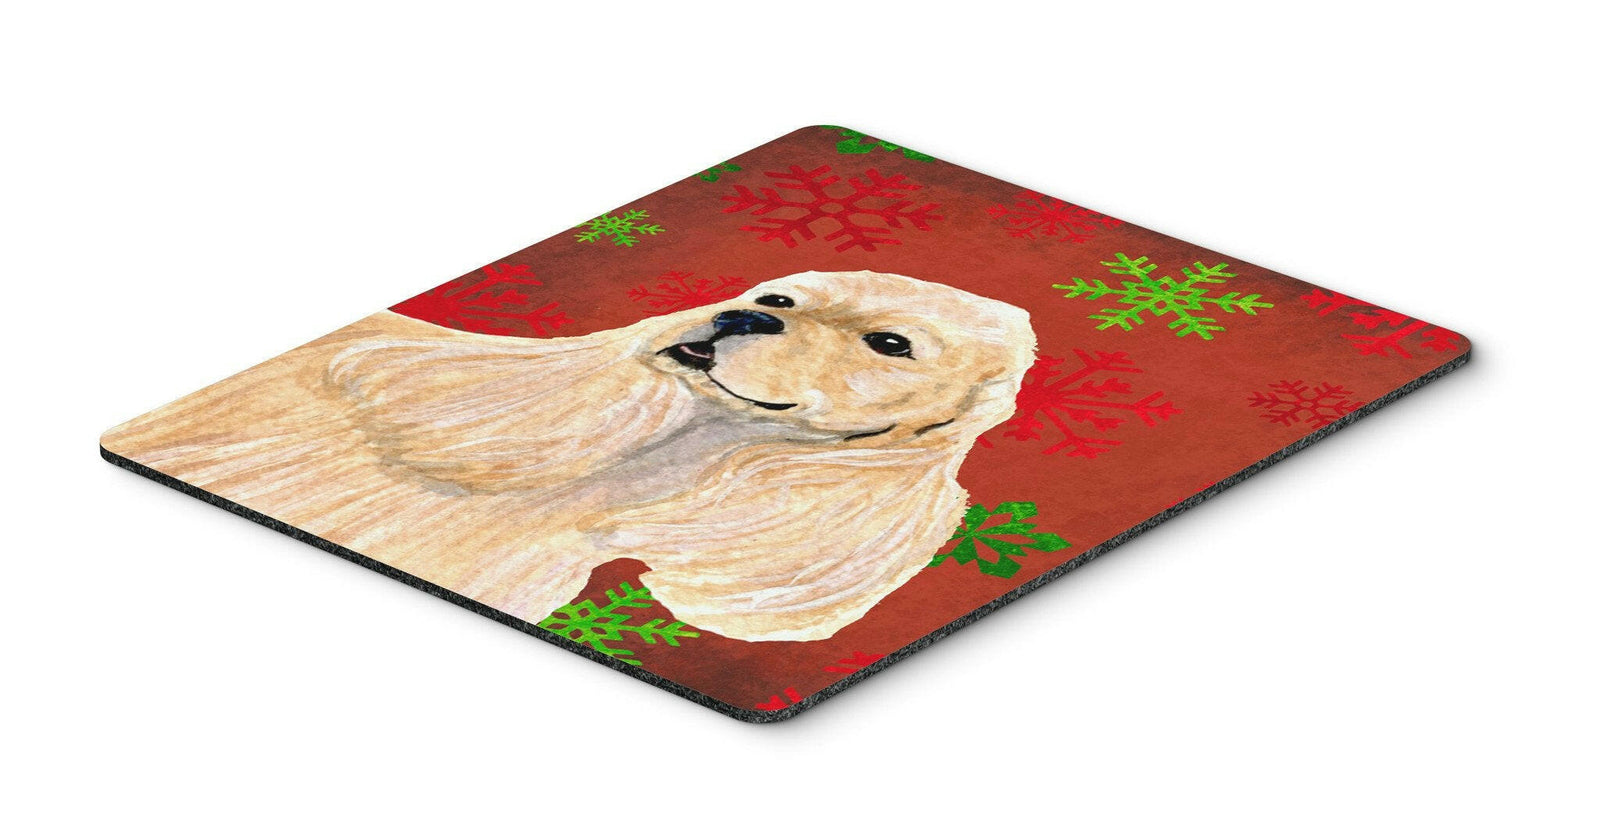 Cocker Spaniel Red and Green Snowflakes Christmas Mouse Pad, Hot Pad or Trivet by Caroline's Treasures